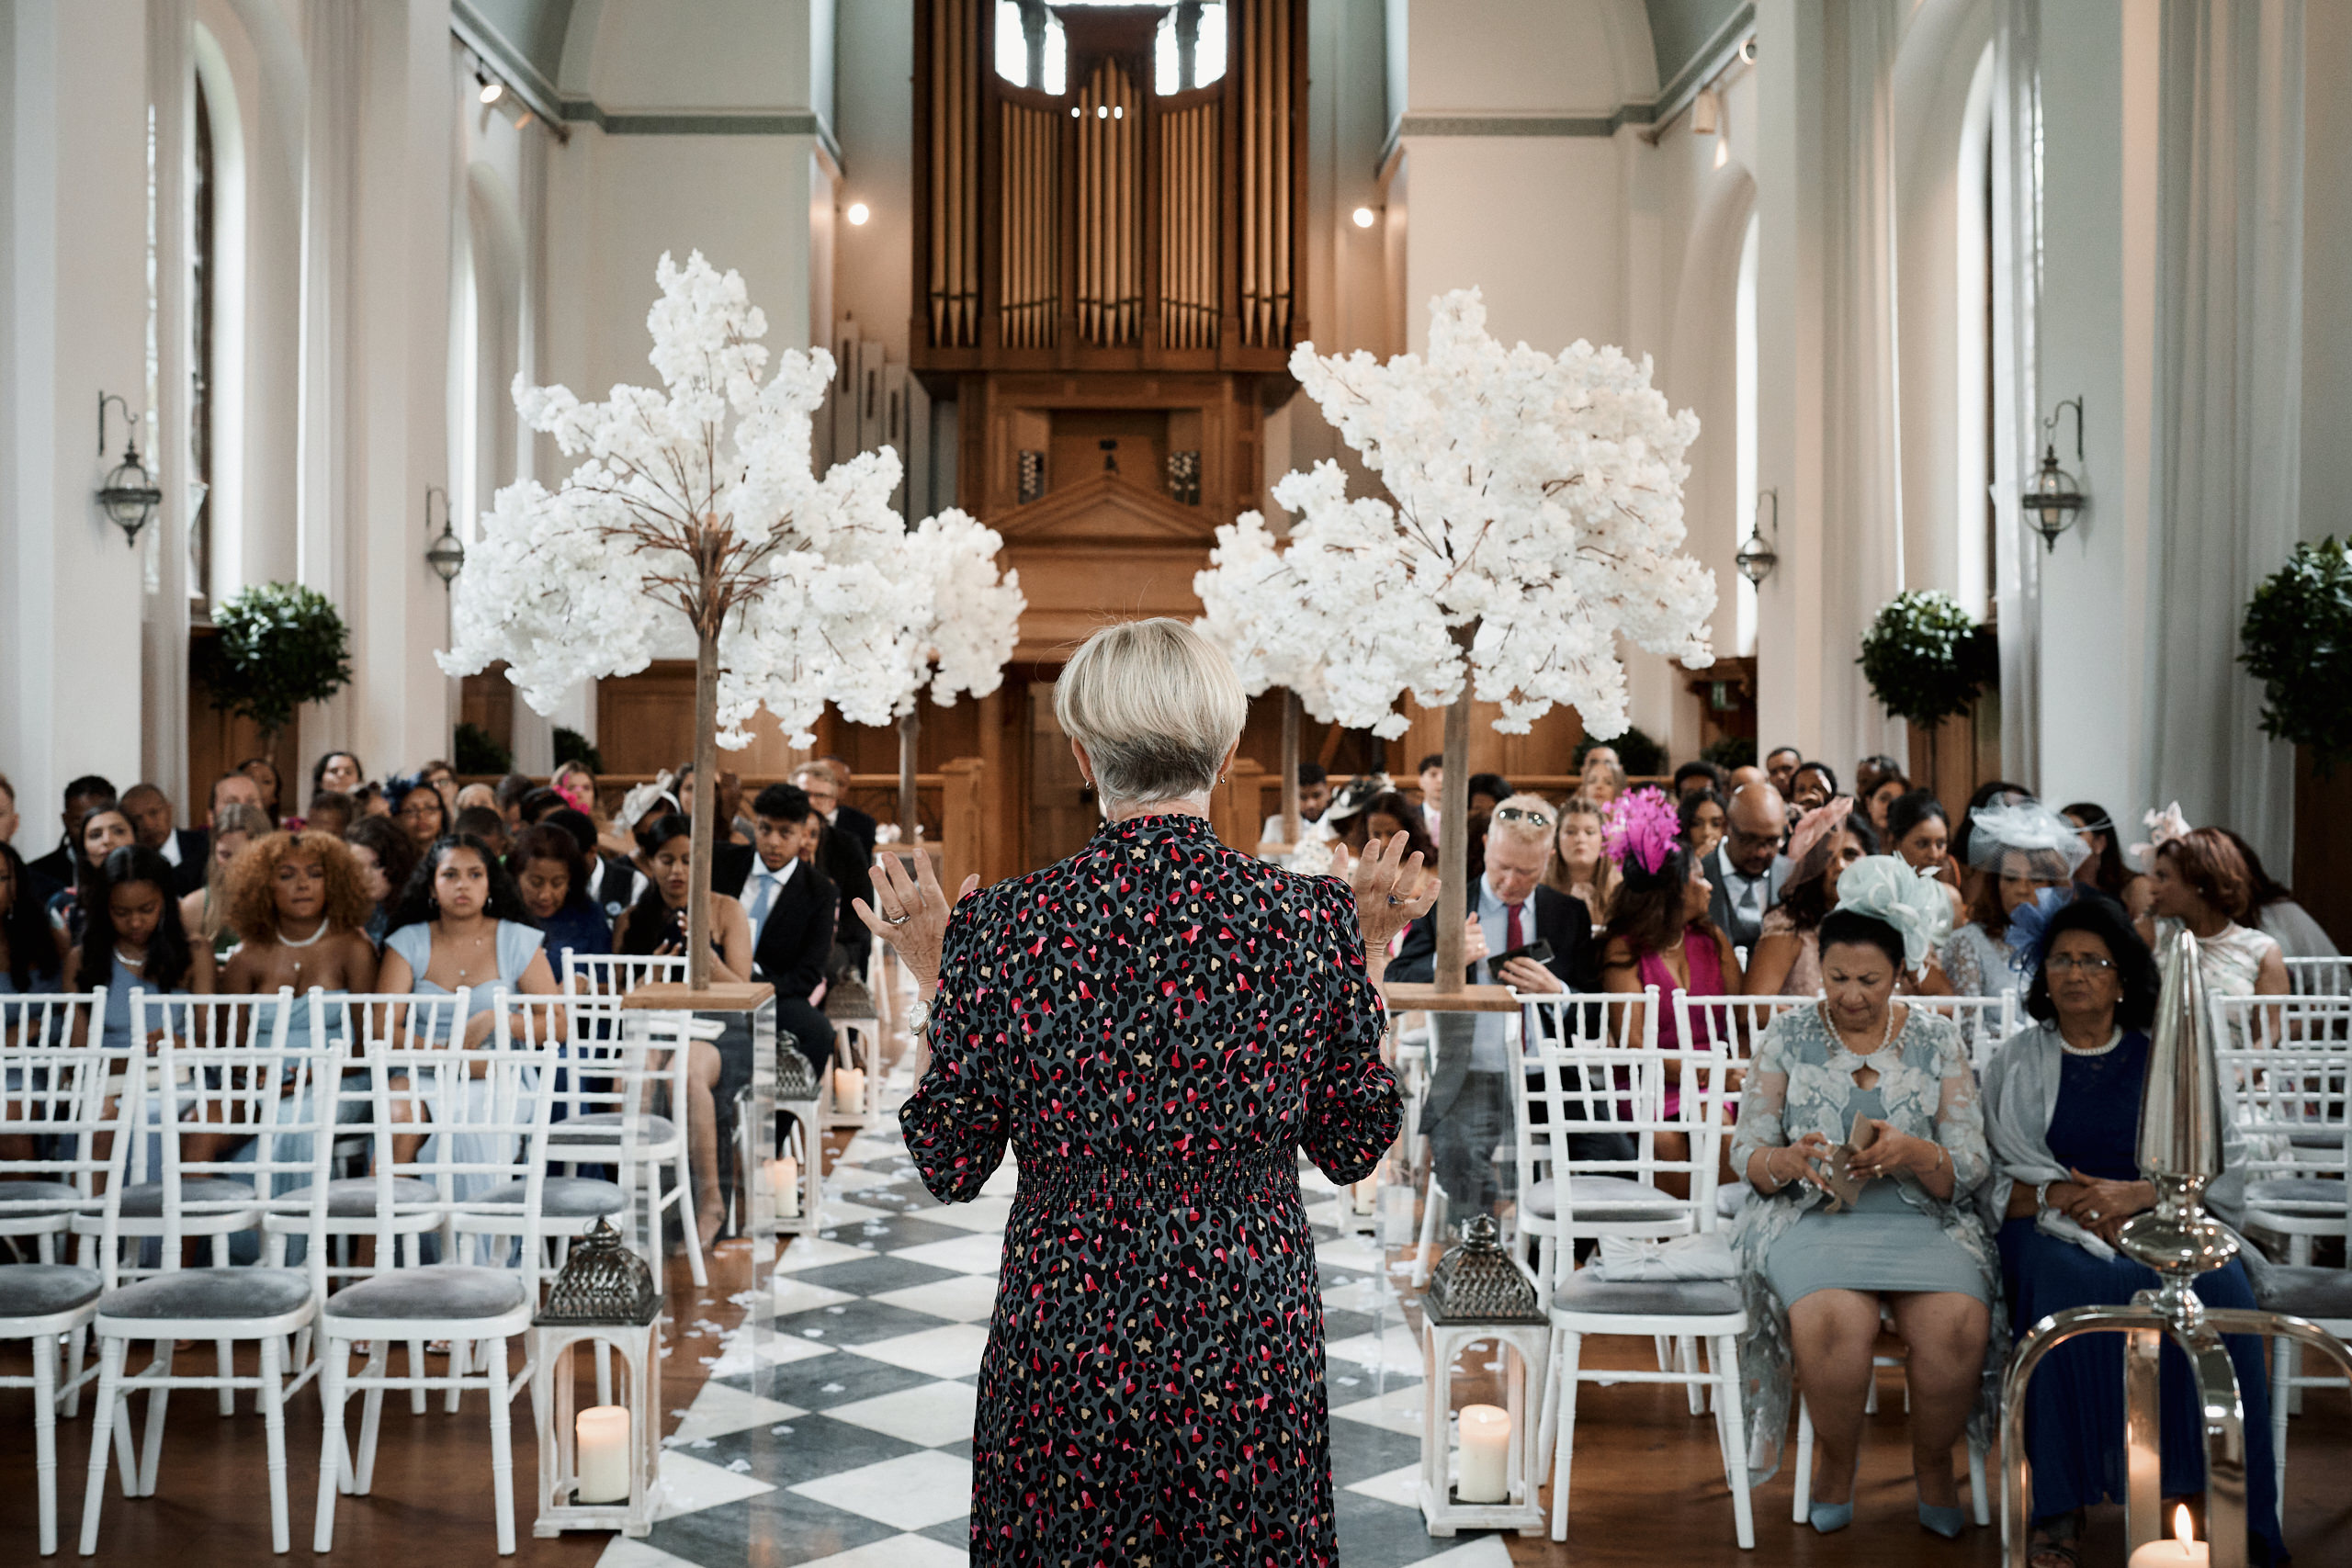 A lady standing in front of a bunch of people at a wedding.